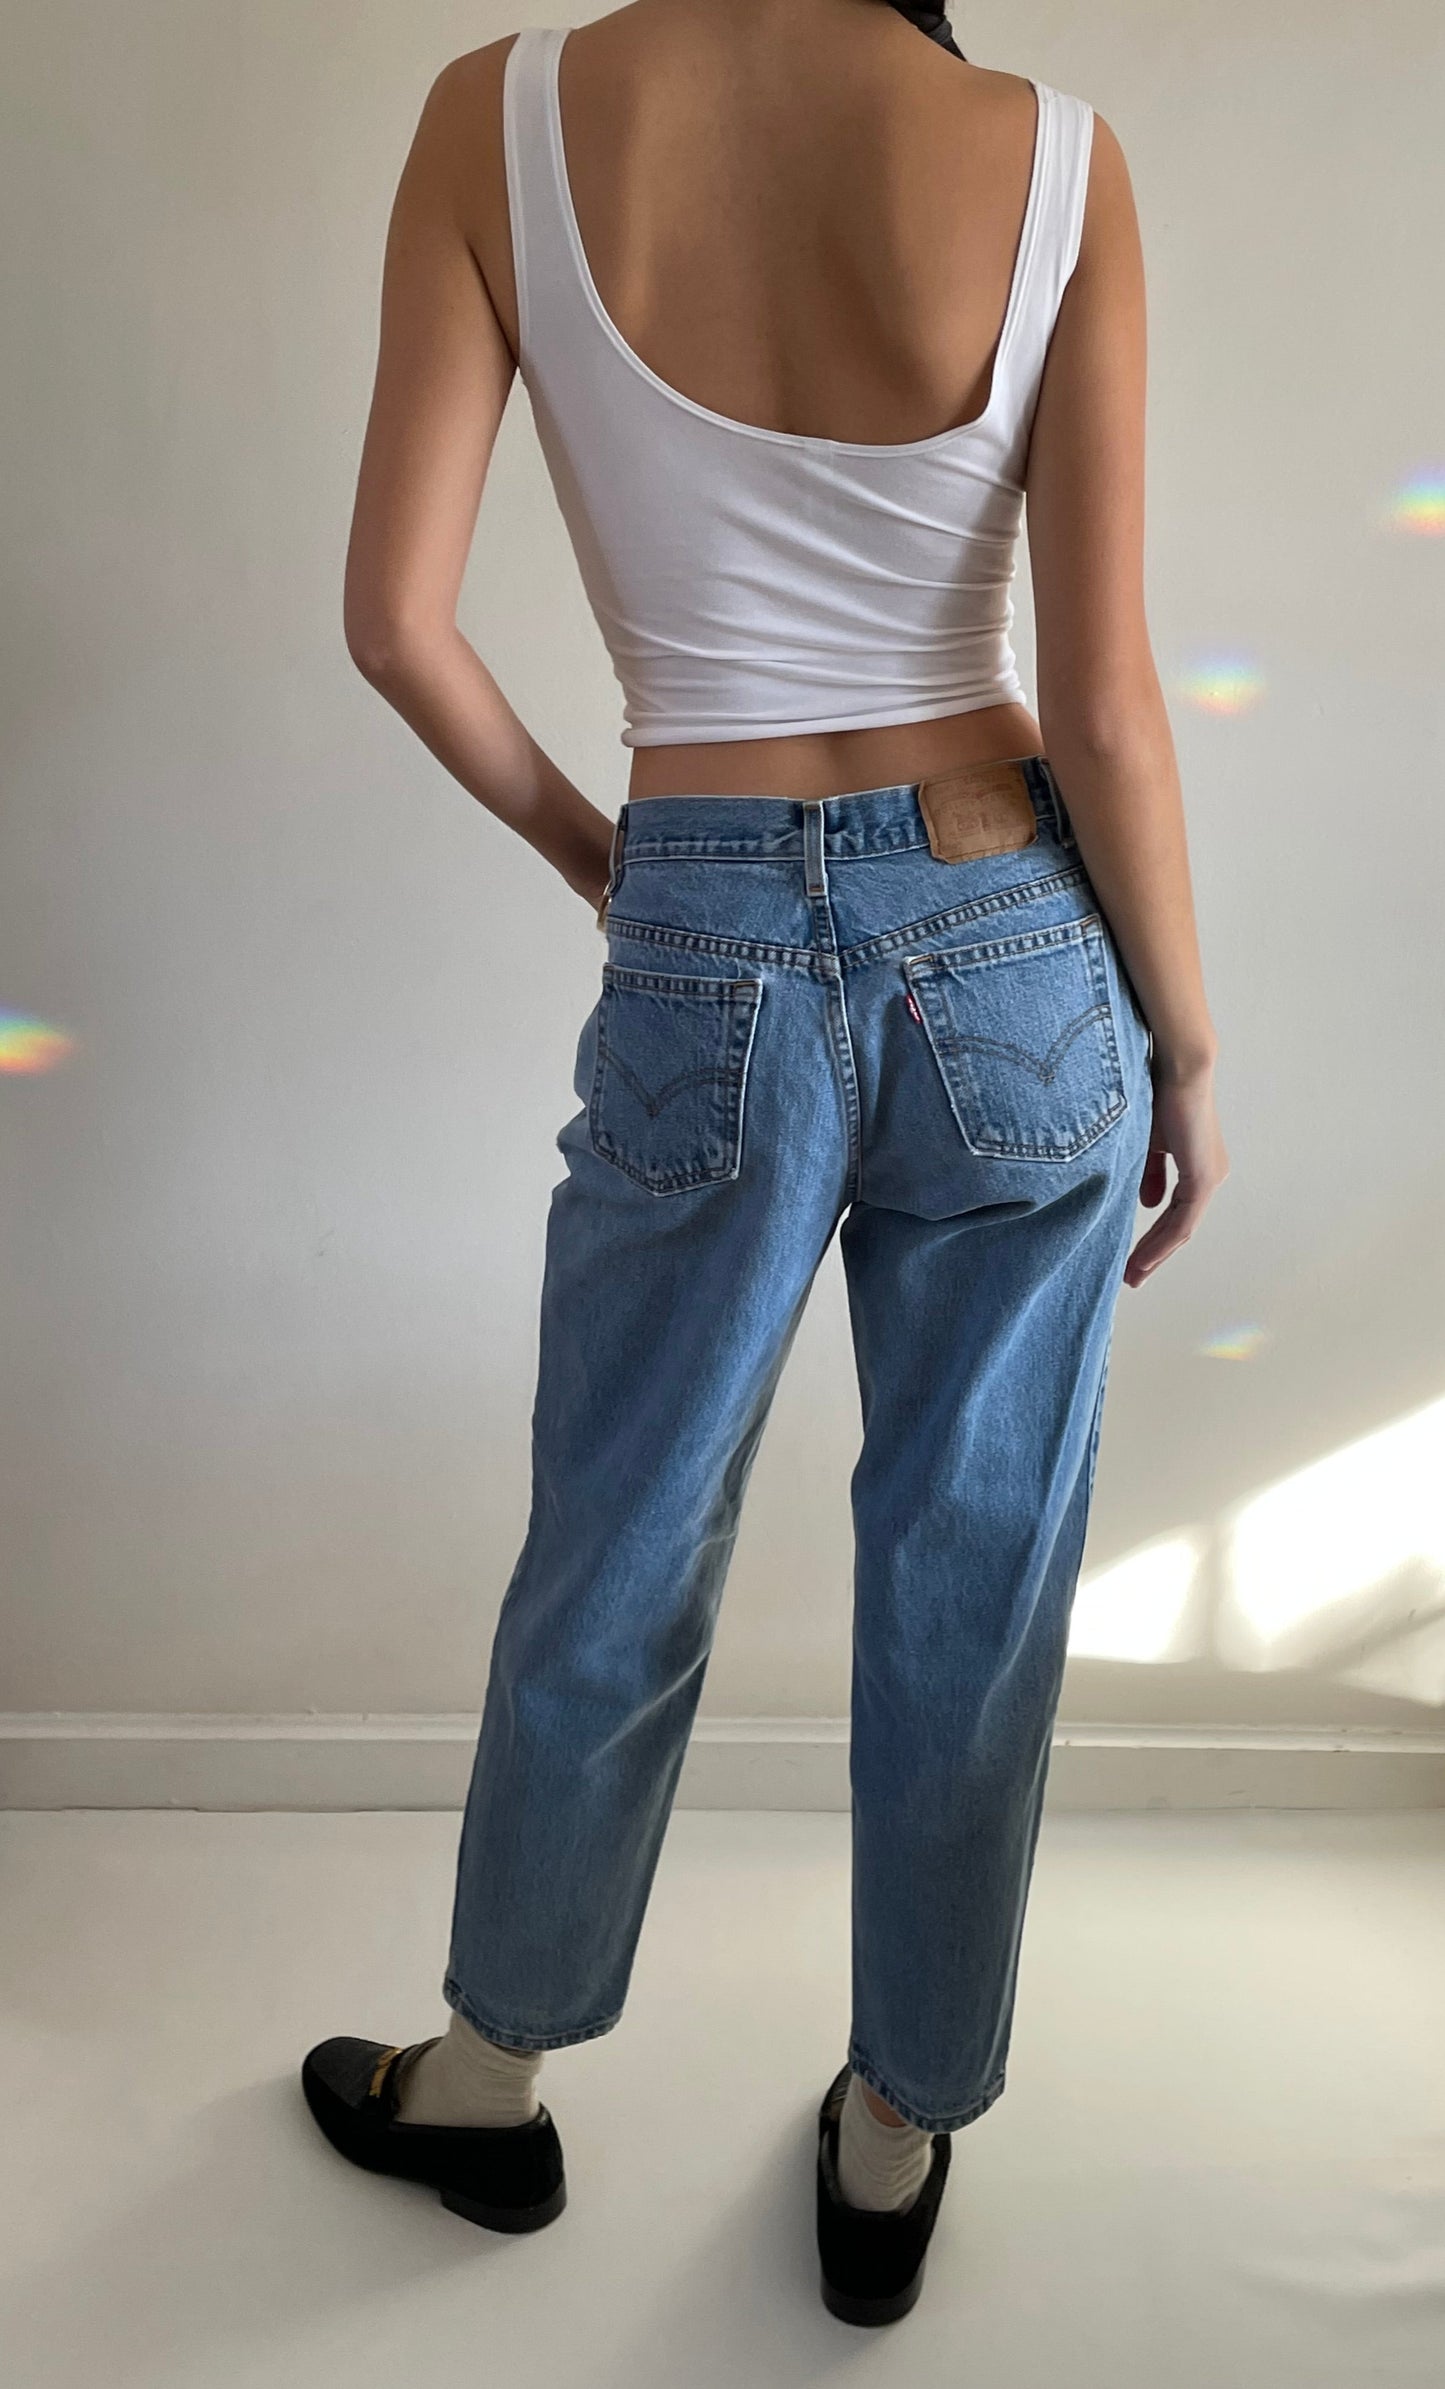 Vintage Levi's 550 high waisted faded light wash zipper Levis jeans made in USA size 29